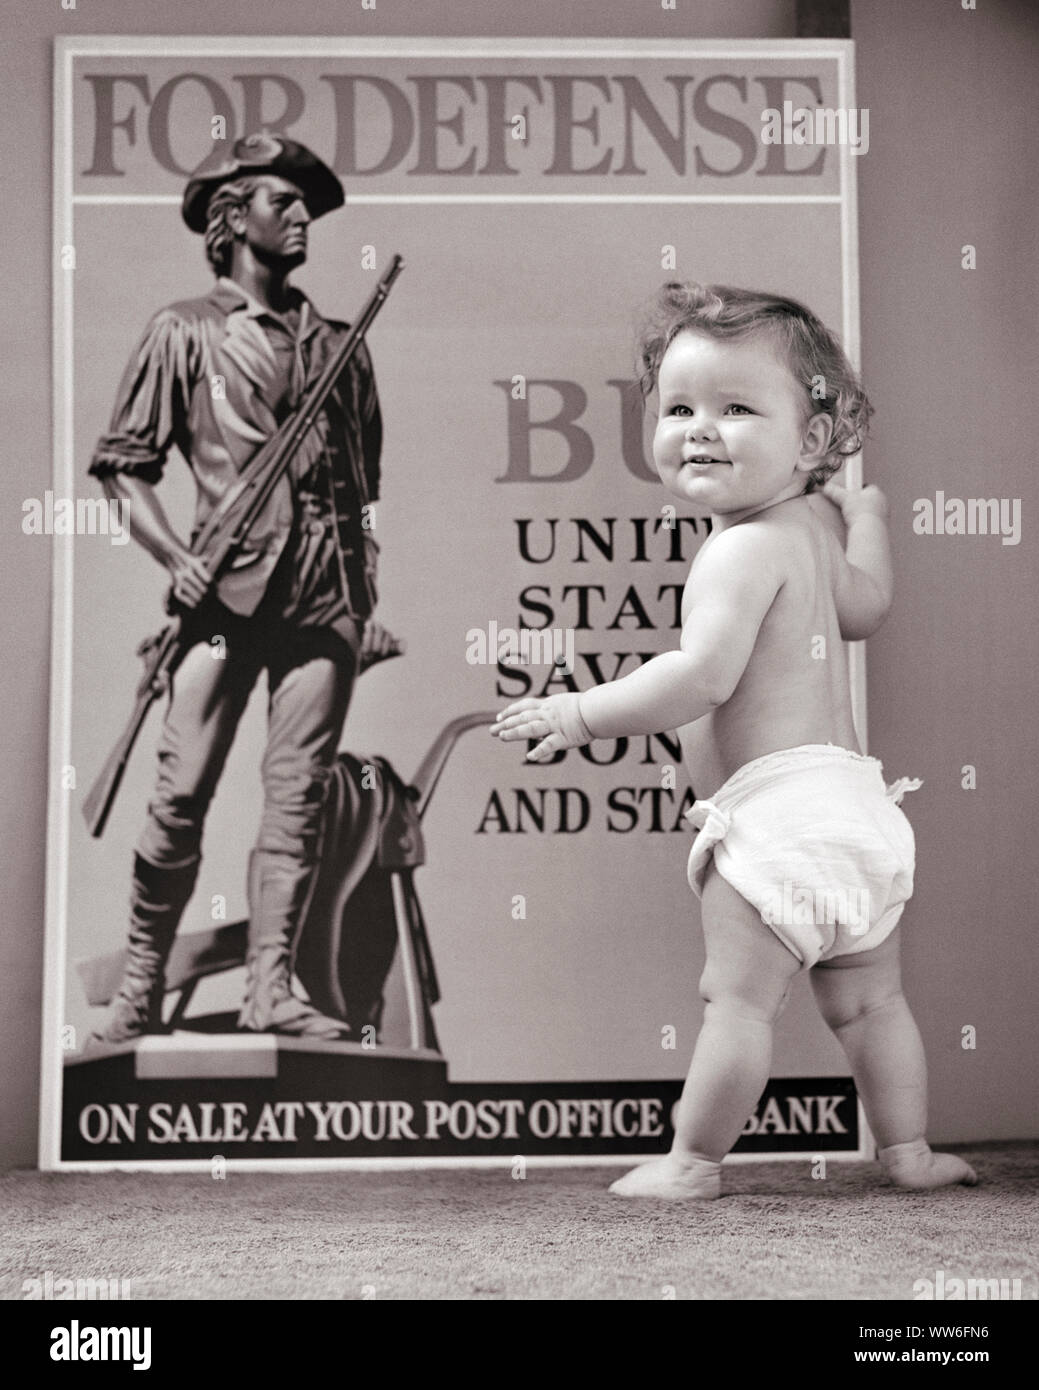 1940s TODDLER WITH MINUTE MAN DEFENSE POSTER SAVINGS BONDS WORLD WAR II - d477 HAR001 HARS DIAPER B&W NORTH AMERICA EYE CONTACT FREEDOM GOALS NORTH AMERICAN HAPPINESS BONDS PROTECTION VICTORY STRATEGY LEADERSHIP WORLD WARS PRIDE WORLD WAR WORLD WAR TWO WORLD WAR II DIAPERS PATRIOT POLITICS CONNECTION CONCEPTUAL PATRIOTIC WORLD WAR 2 DEFENSE GROWTH JUVENILES PATRIOTISM BABY GIRL BLACK AND WHITE CAUCASIAN ETHNICITY HAR001 MINUTE OLD FASHIONED Stock Photo